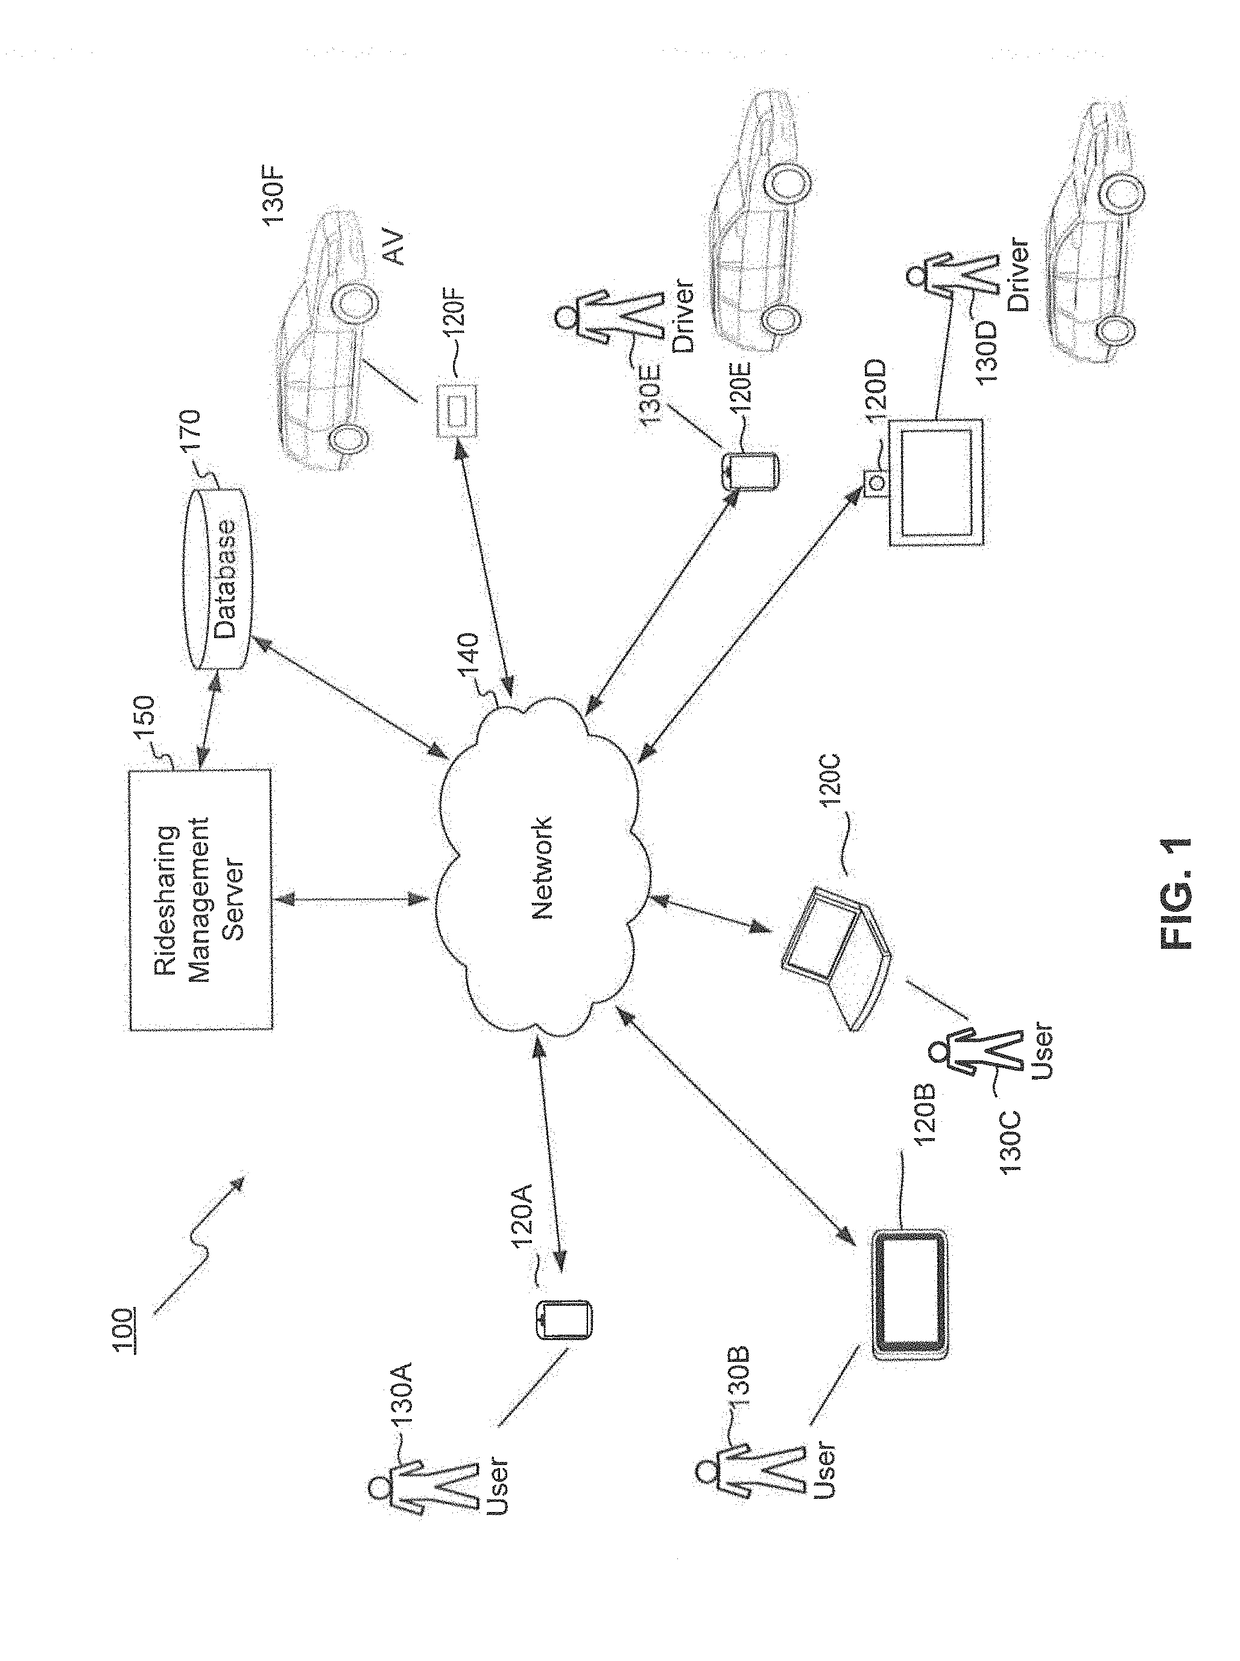 Systems and Methods for Vehicle Ridesharing Management